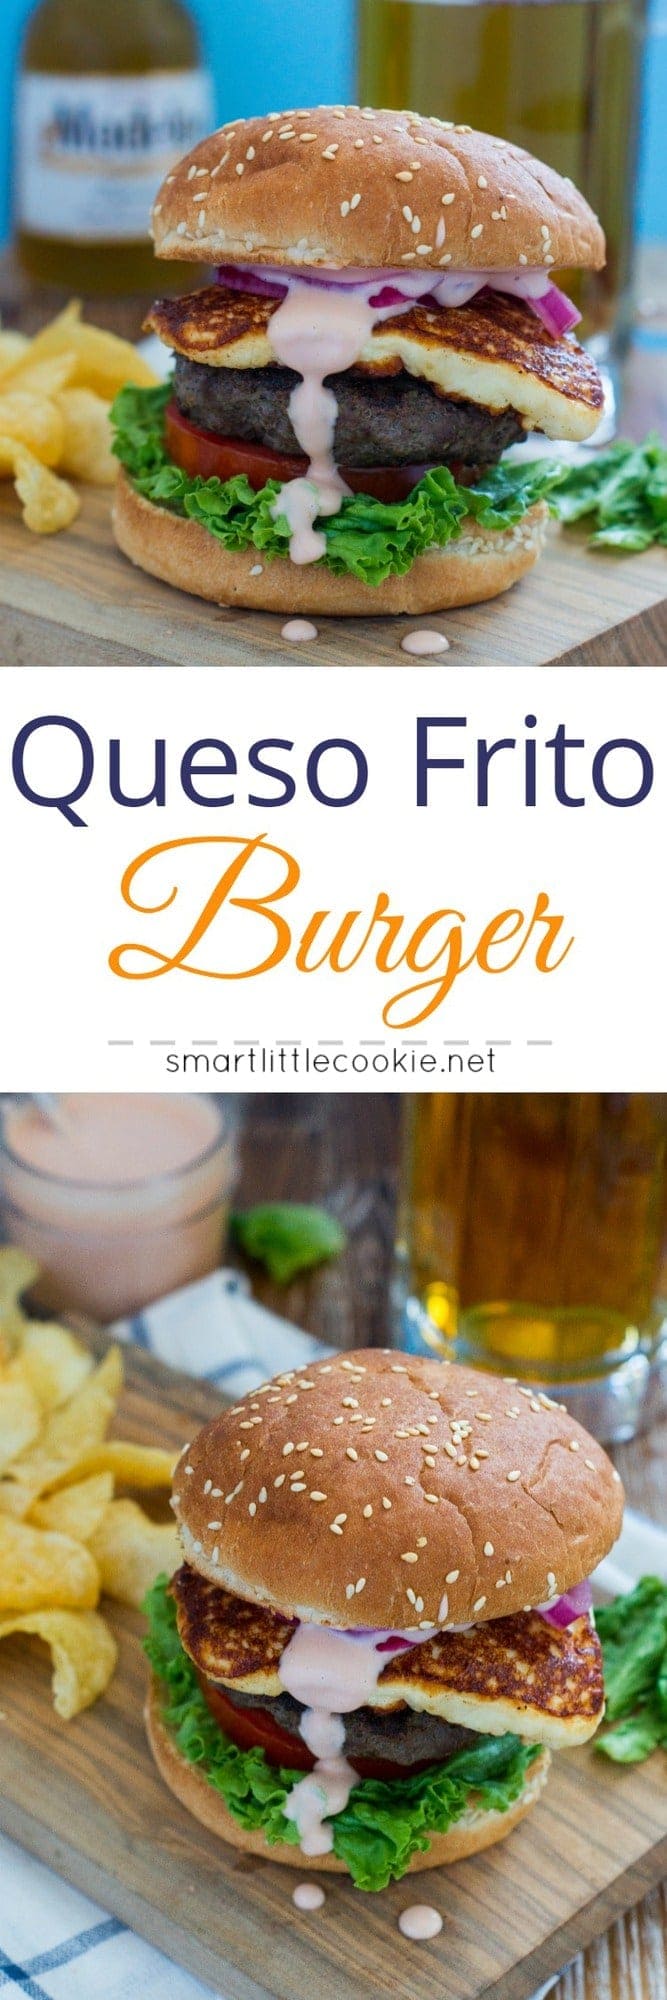 Pinterest image. Queso frito burger with text overlay.